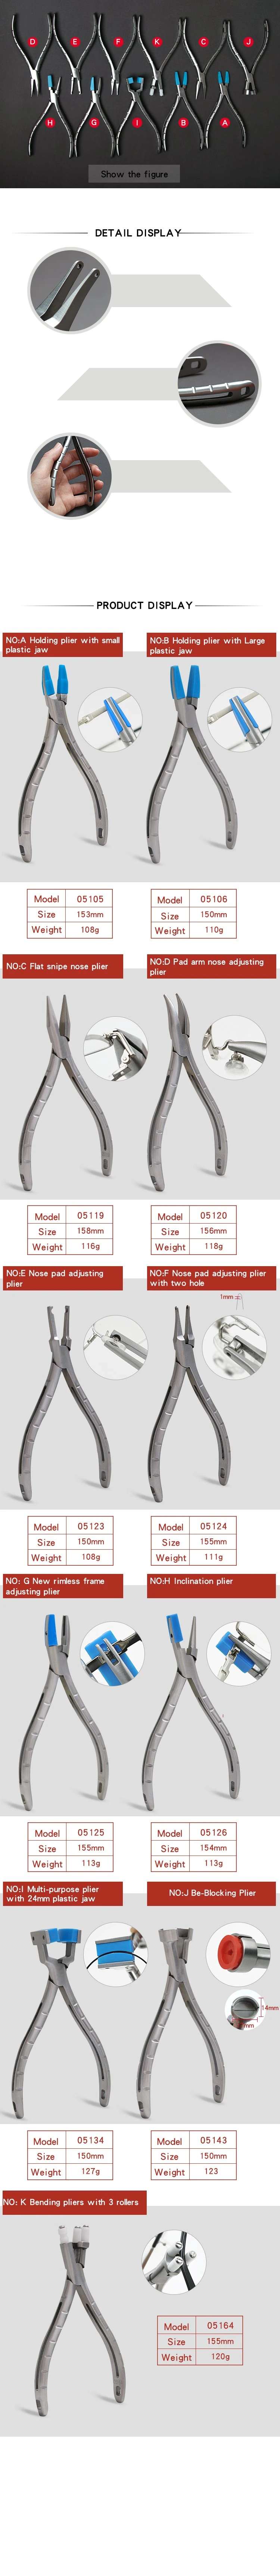 Hot Sale Stainless Steel Pliers with Hollow-out Handle